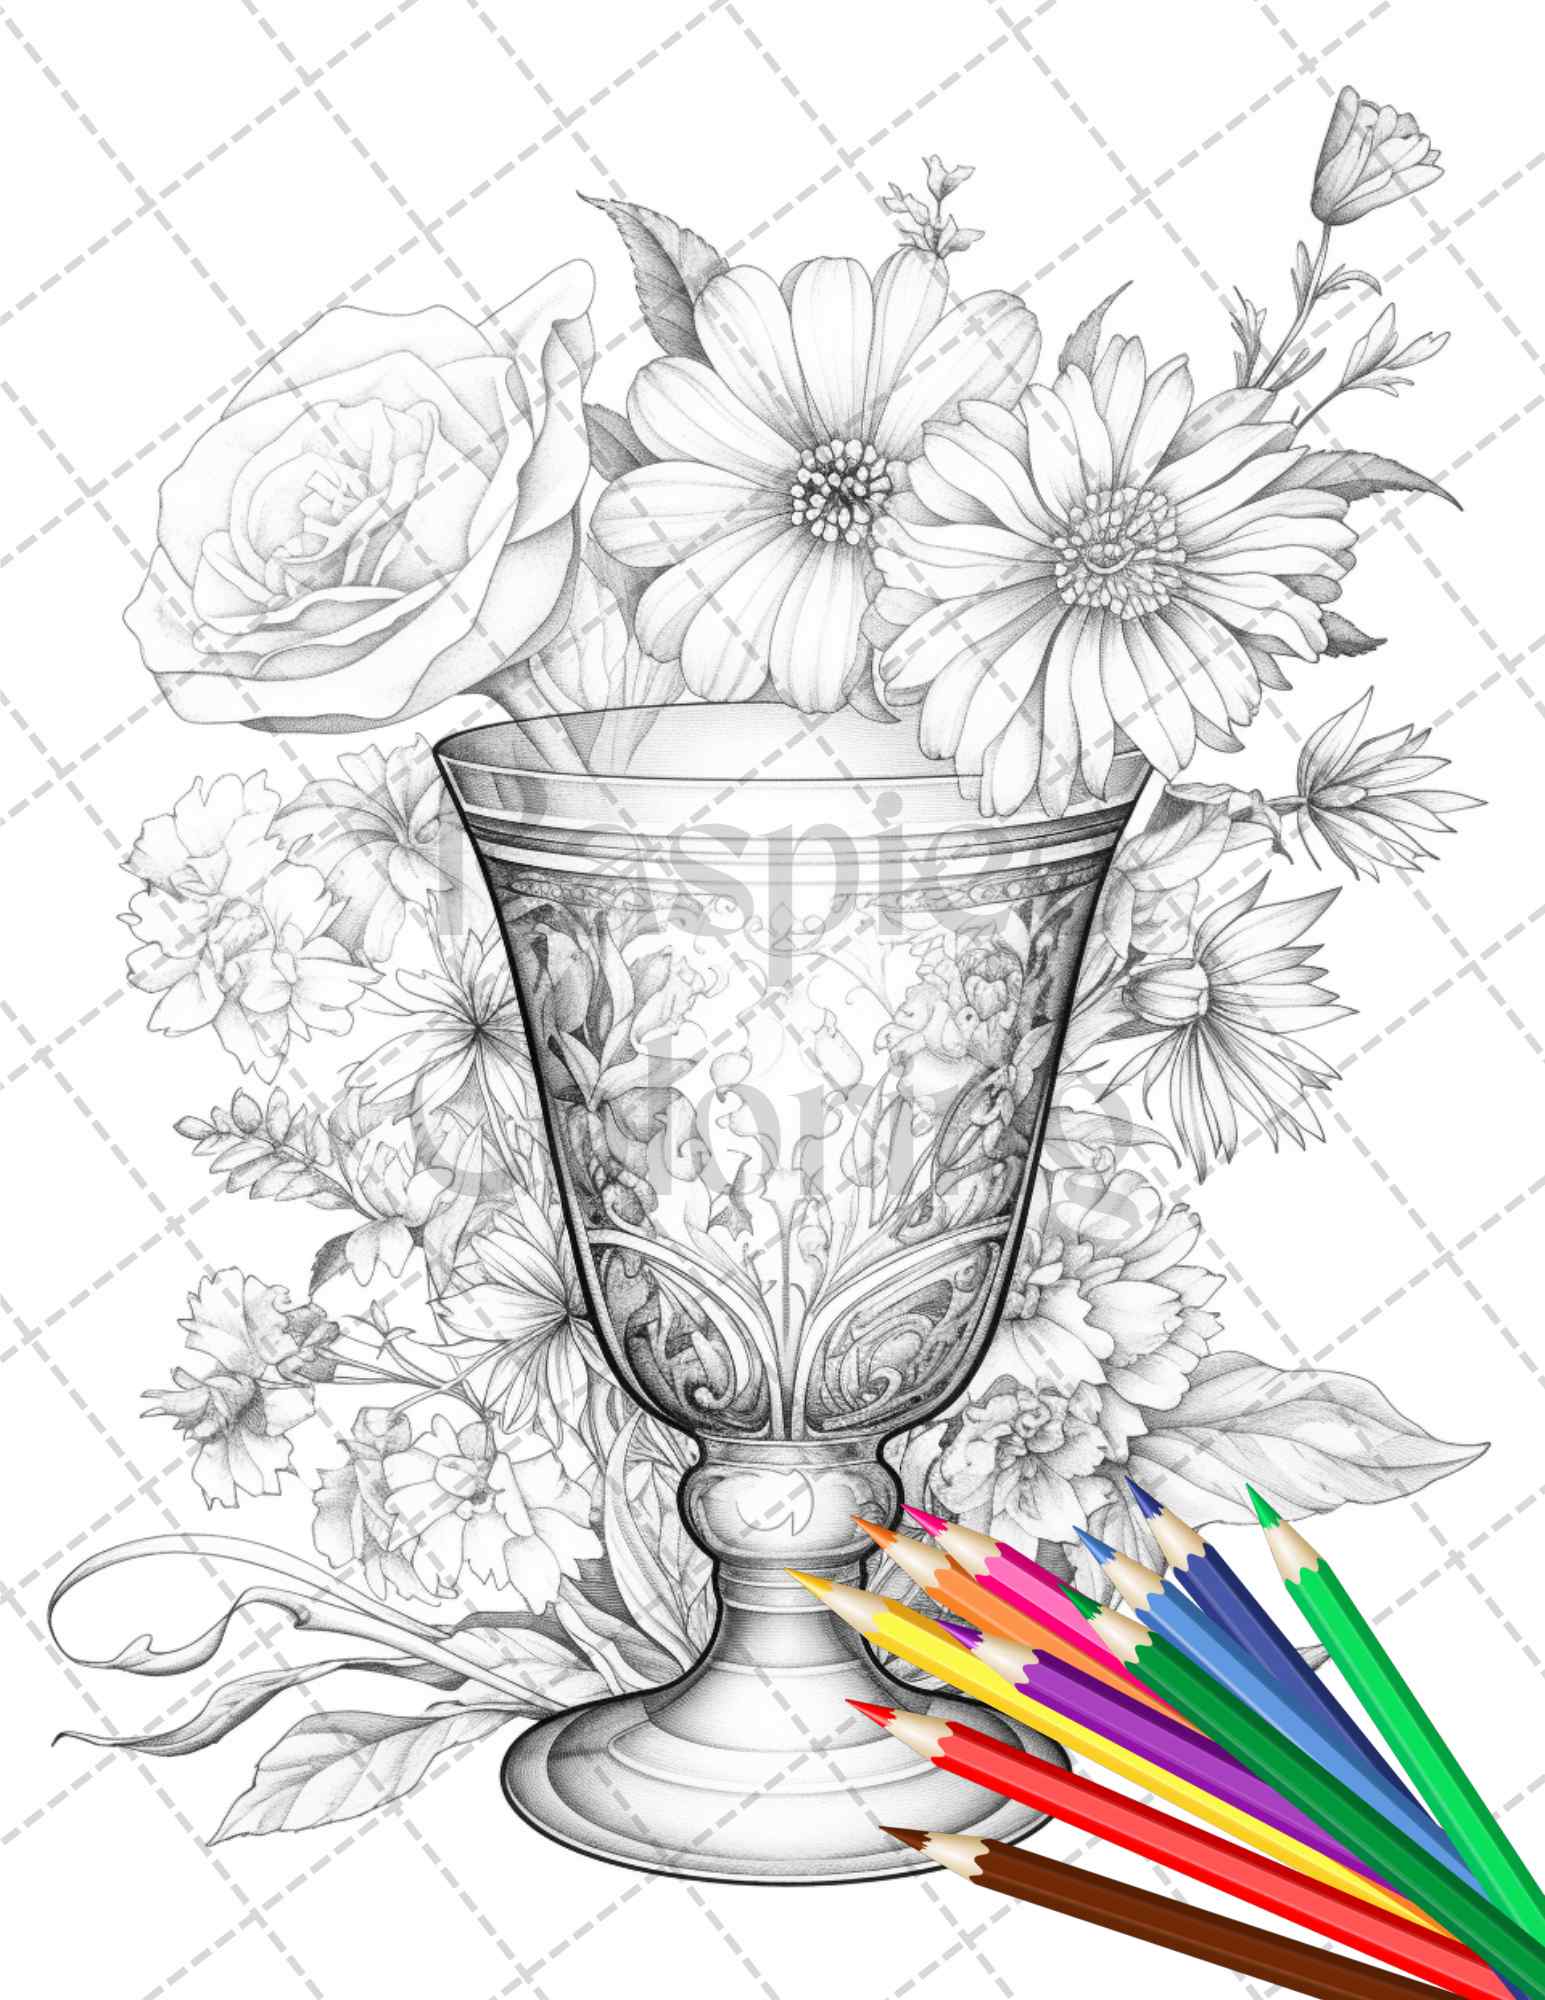 40 Vintage Objects Grayscale Coloring Pages Printable for Adults, PDF File Instant Download - raspiee